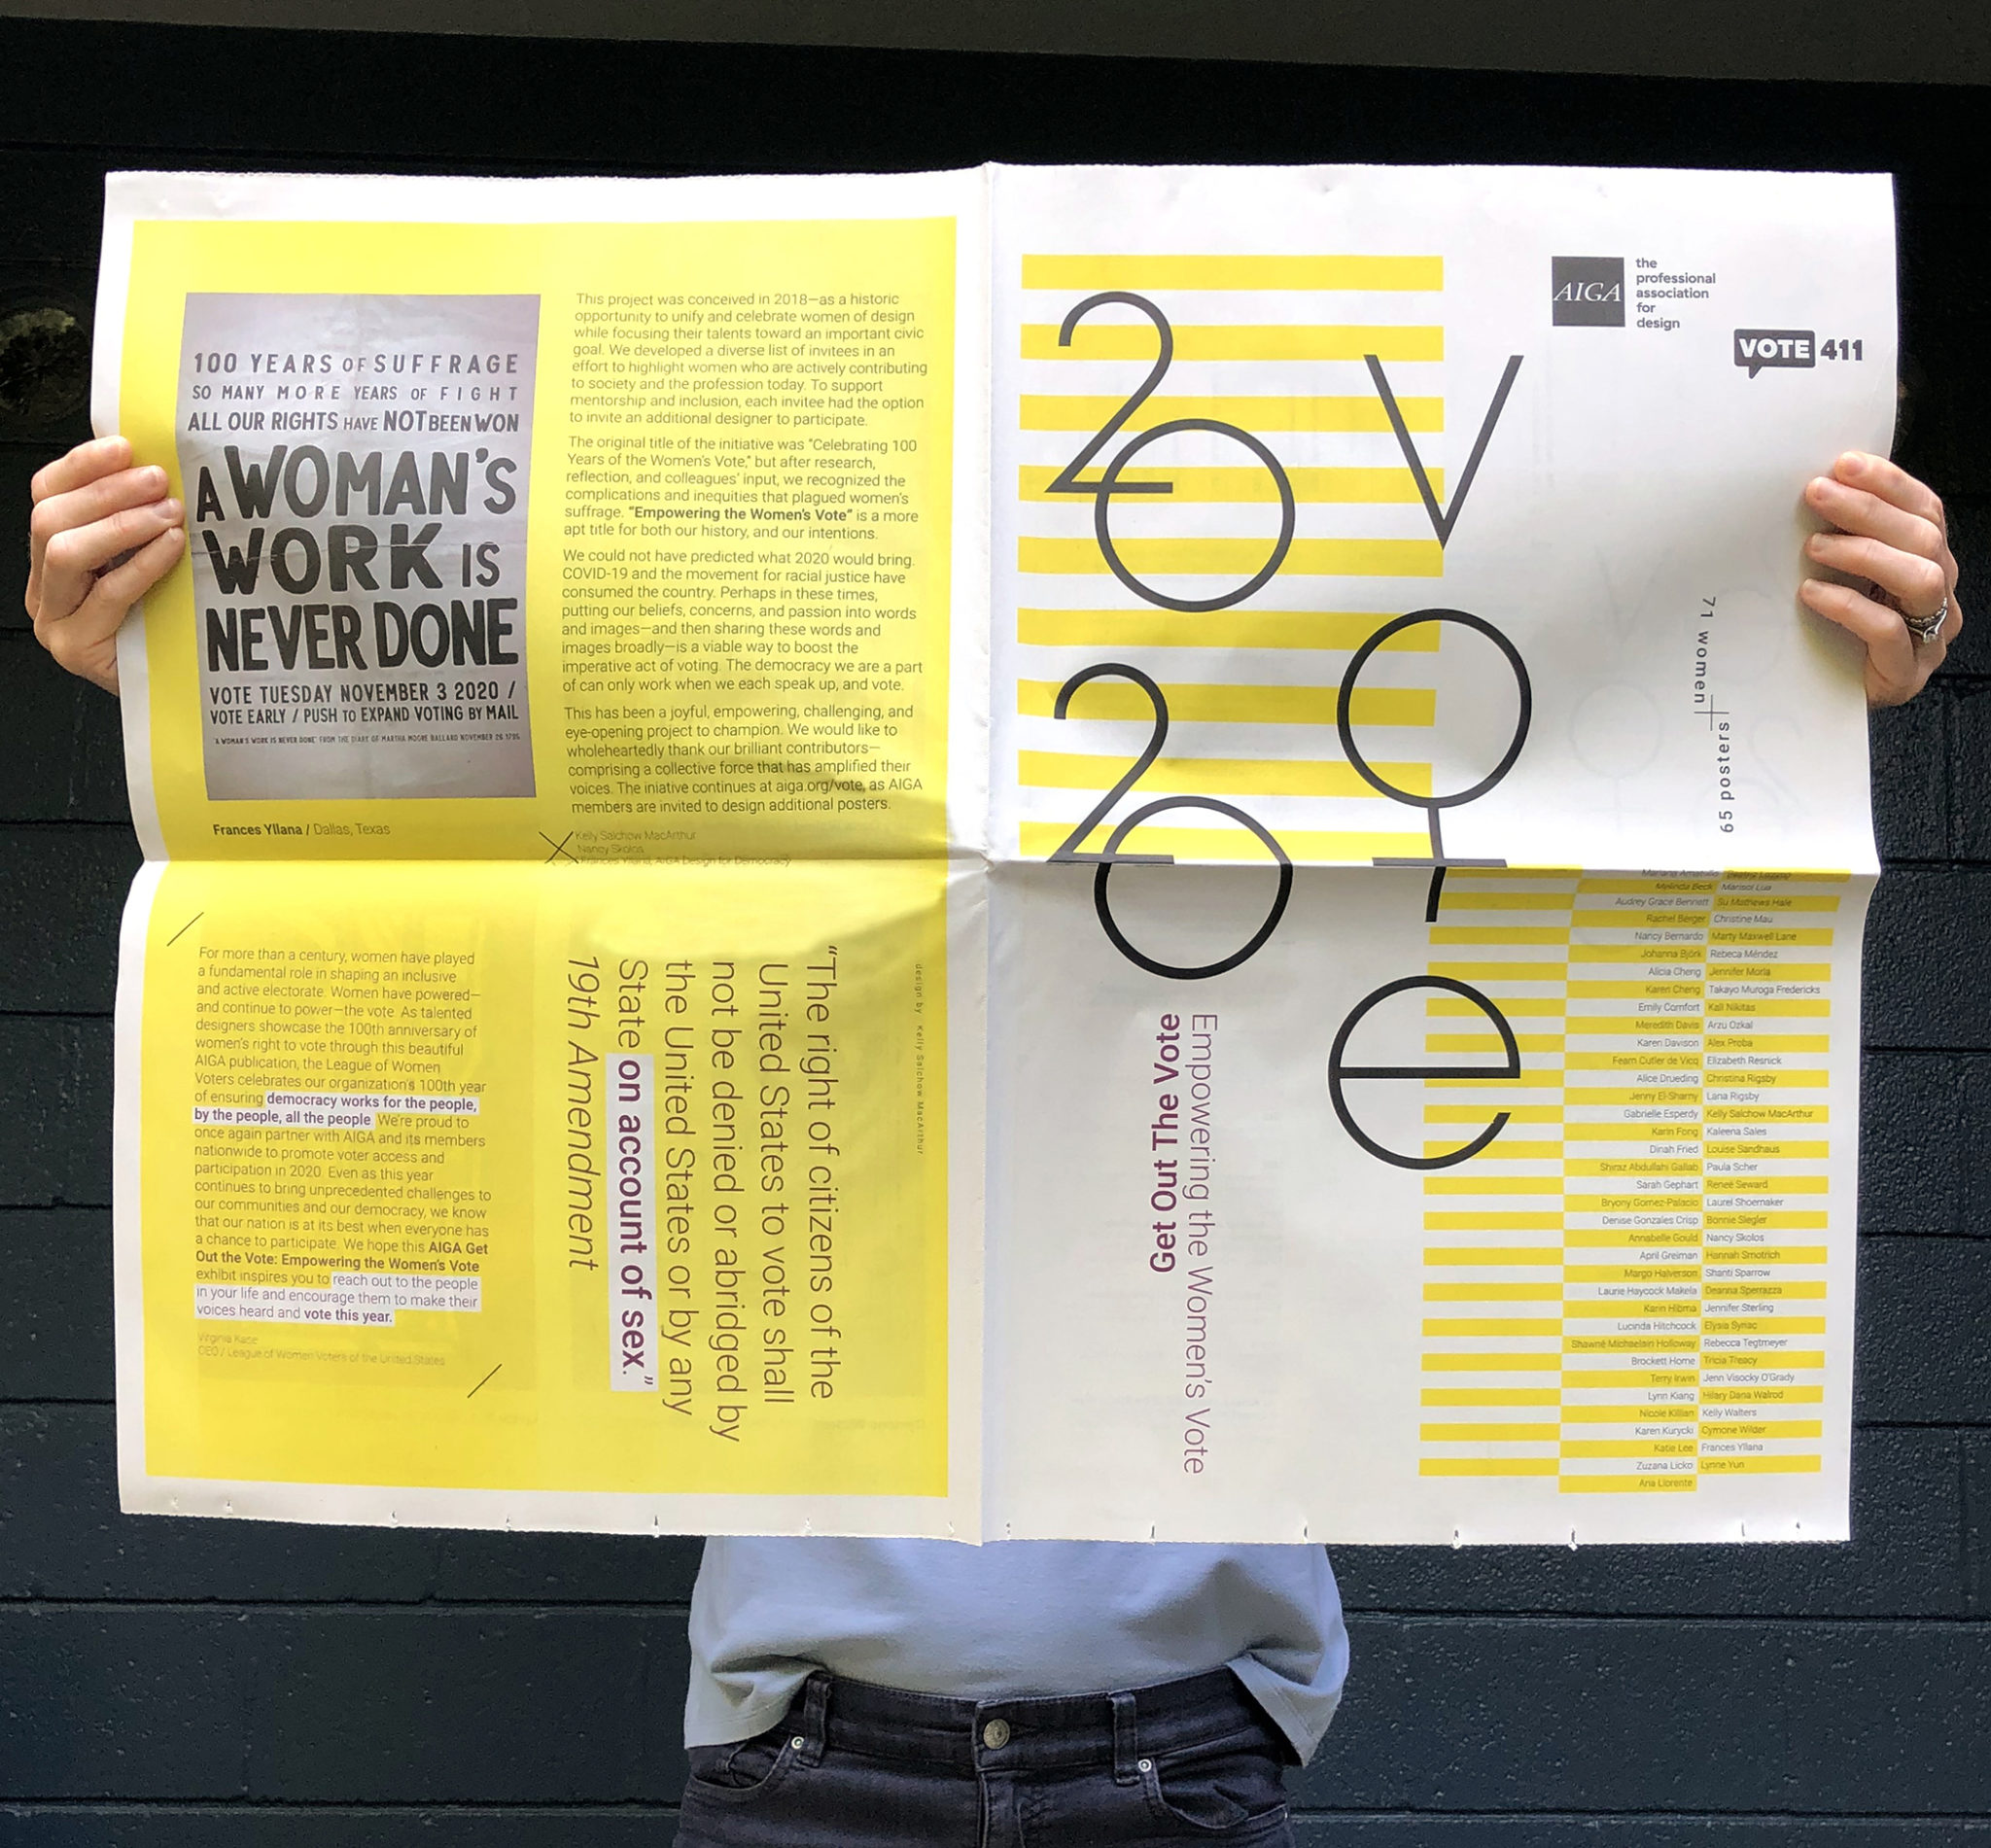 Kelly Salchow MacArthur's hands holding a designed poster covering her face, mostly yellow and grey.